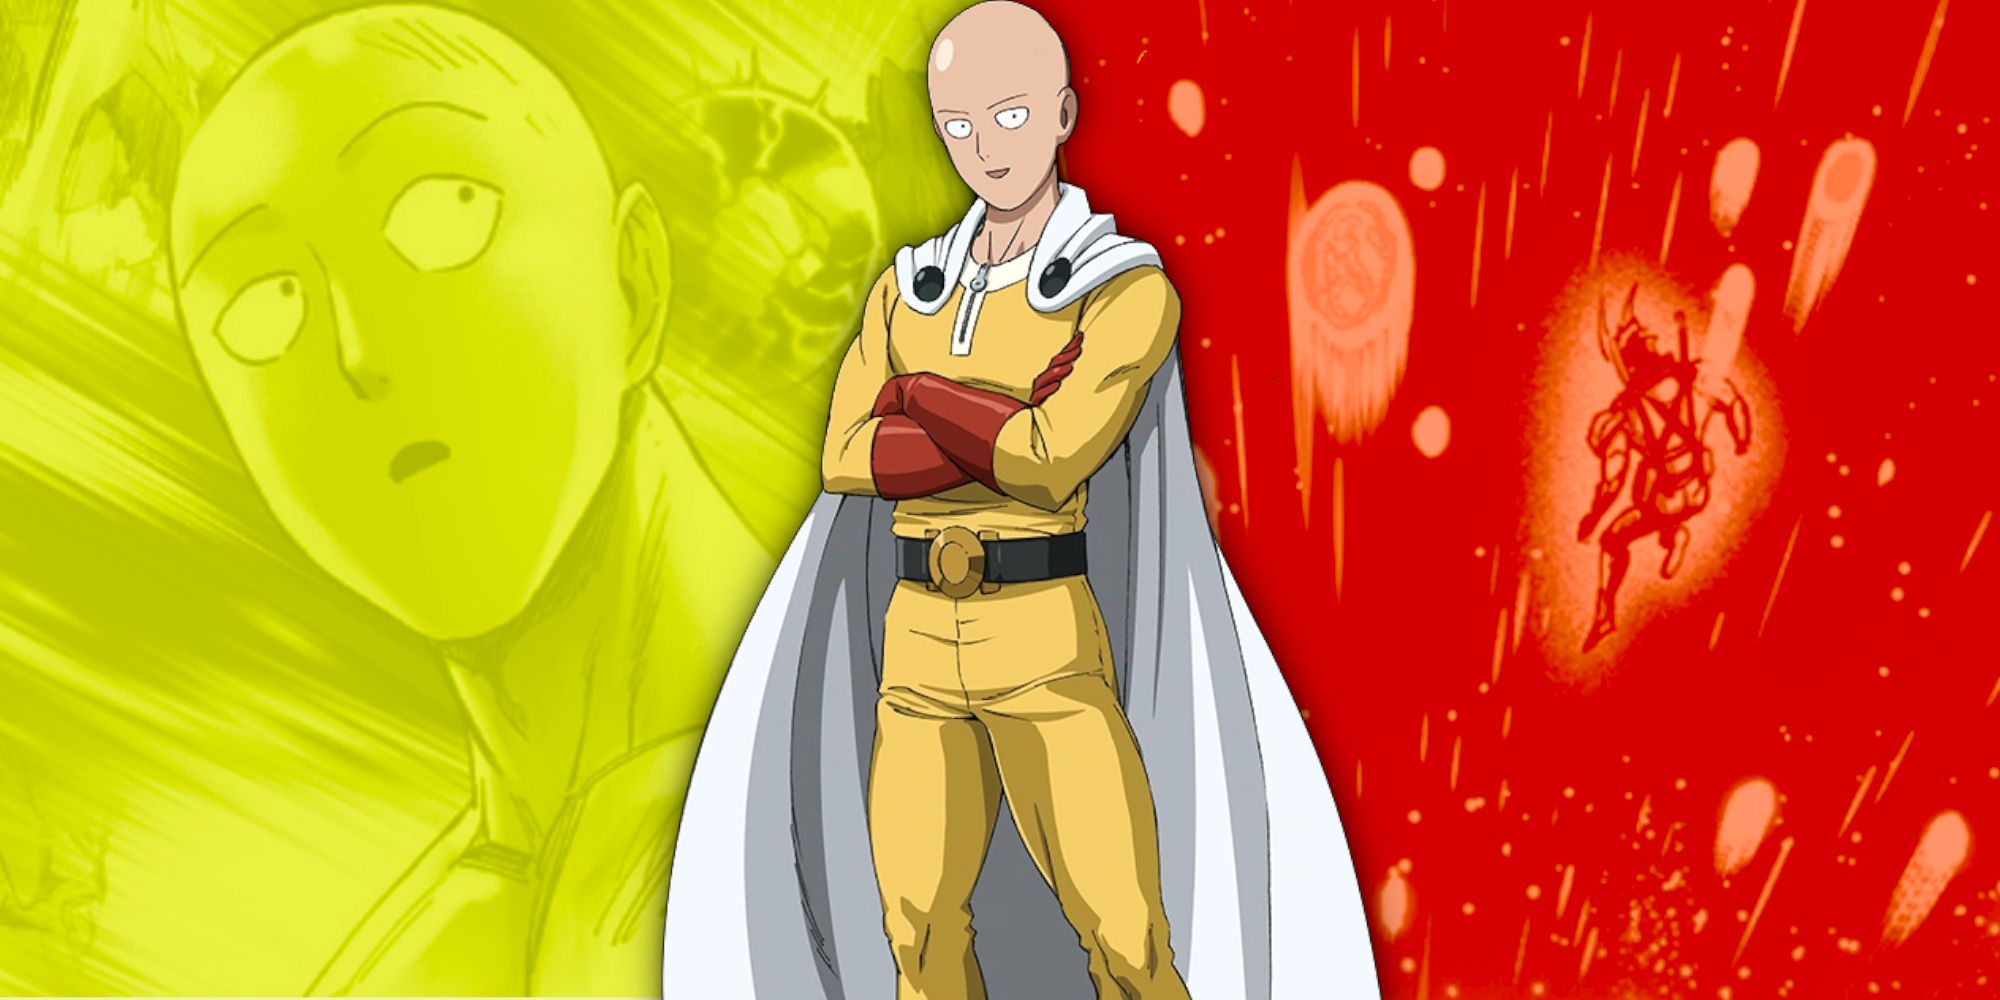 One-Punch Man brings back his multiverse theory to explain the series’ most powerful attack